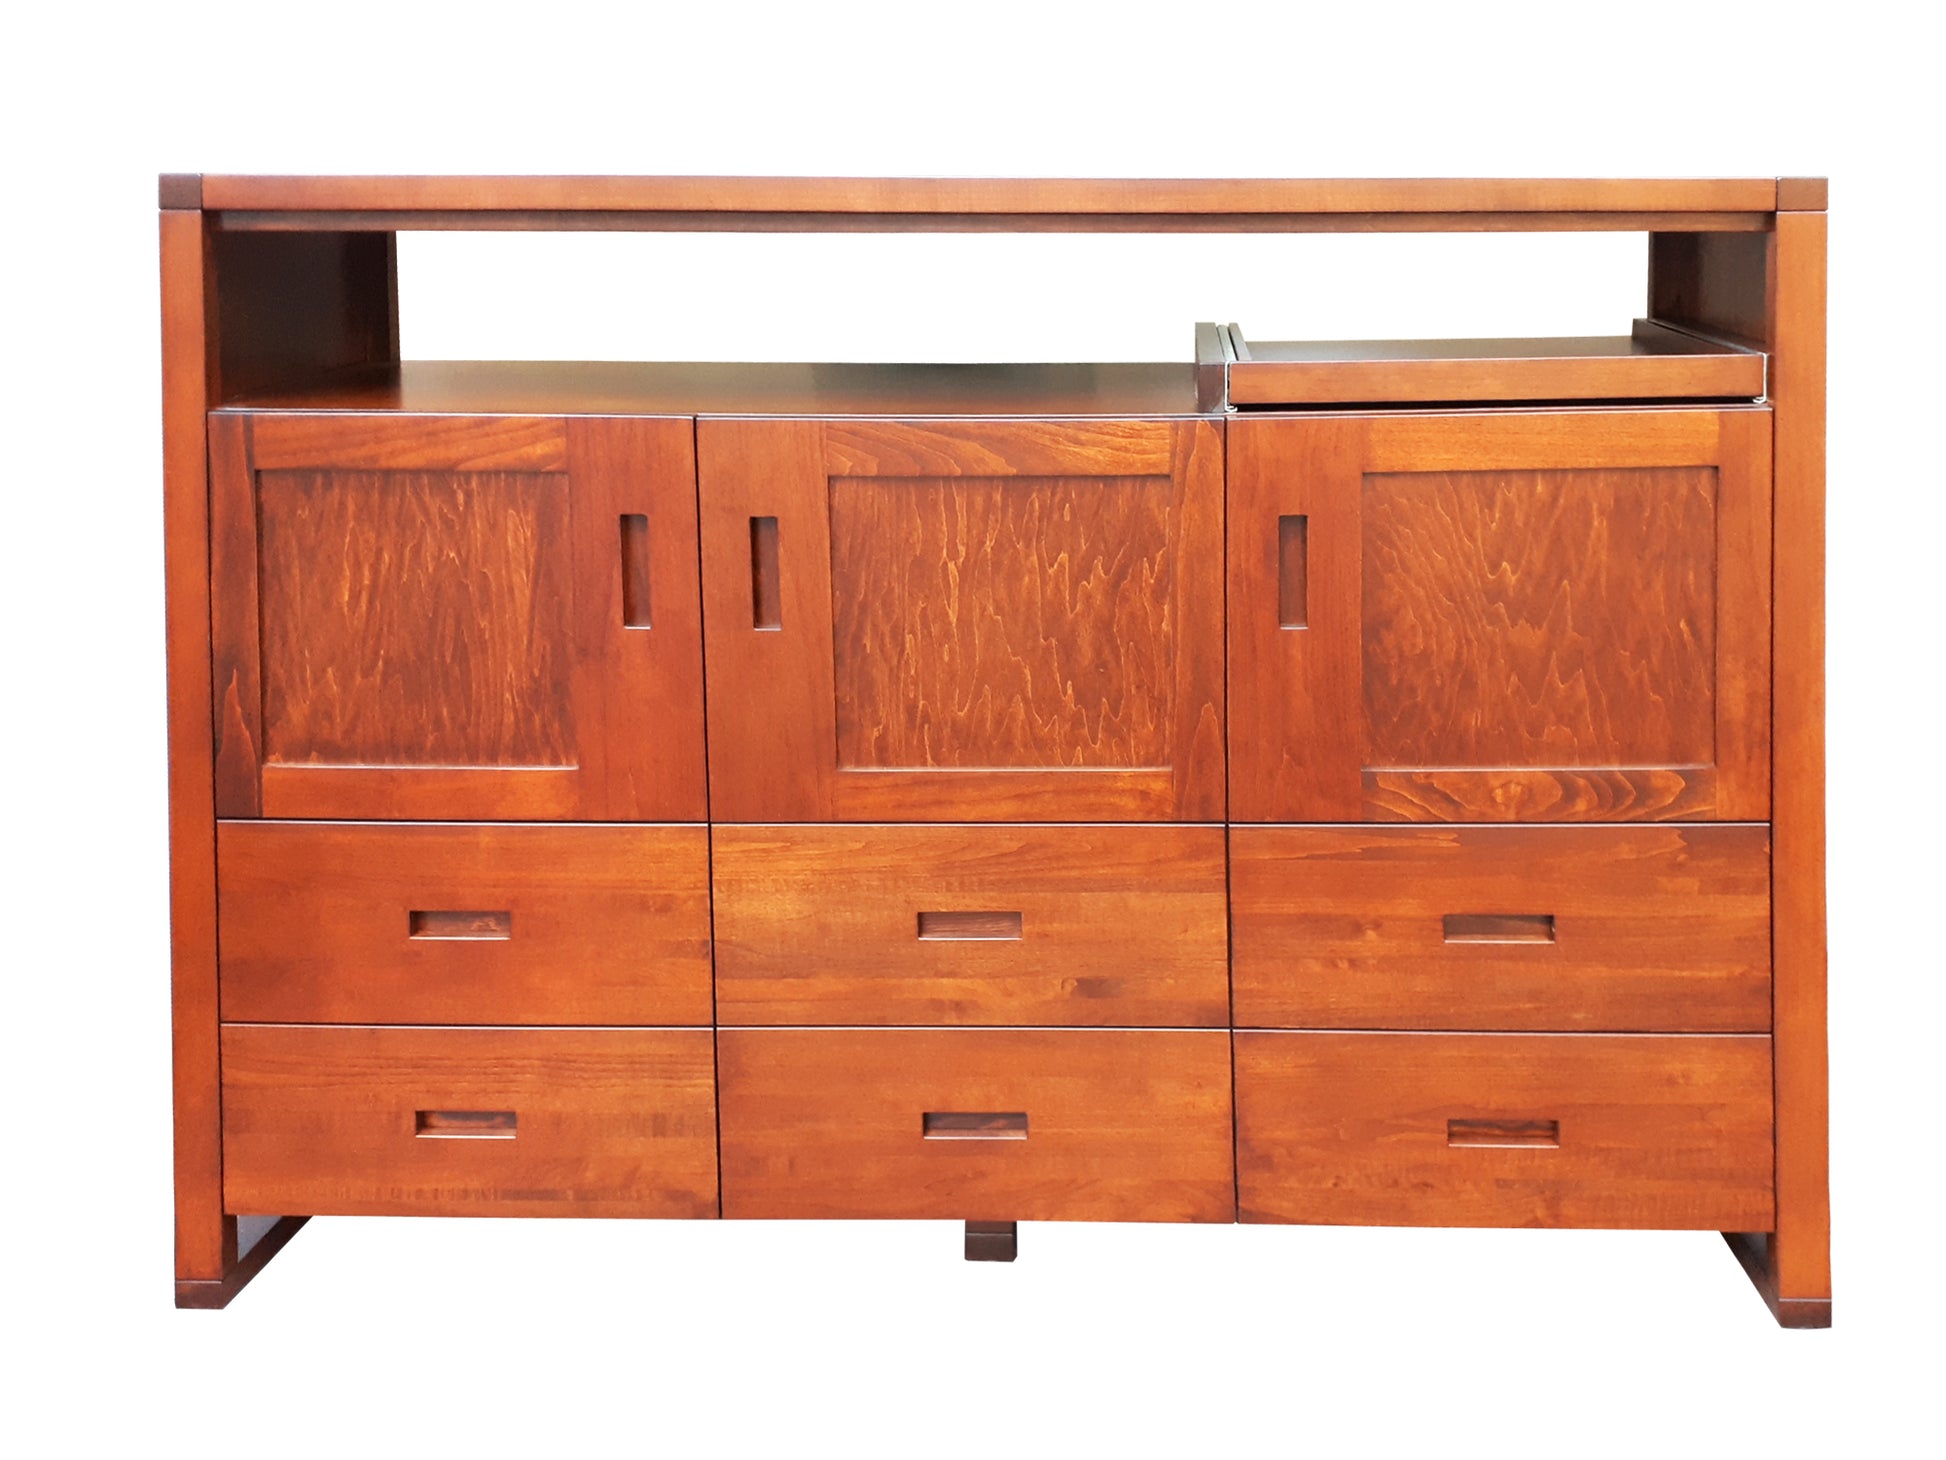 Tangent Entertainment Unit / Dresser with pullout shelf - custom option front view | Custom Example